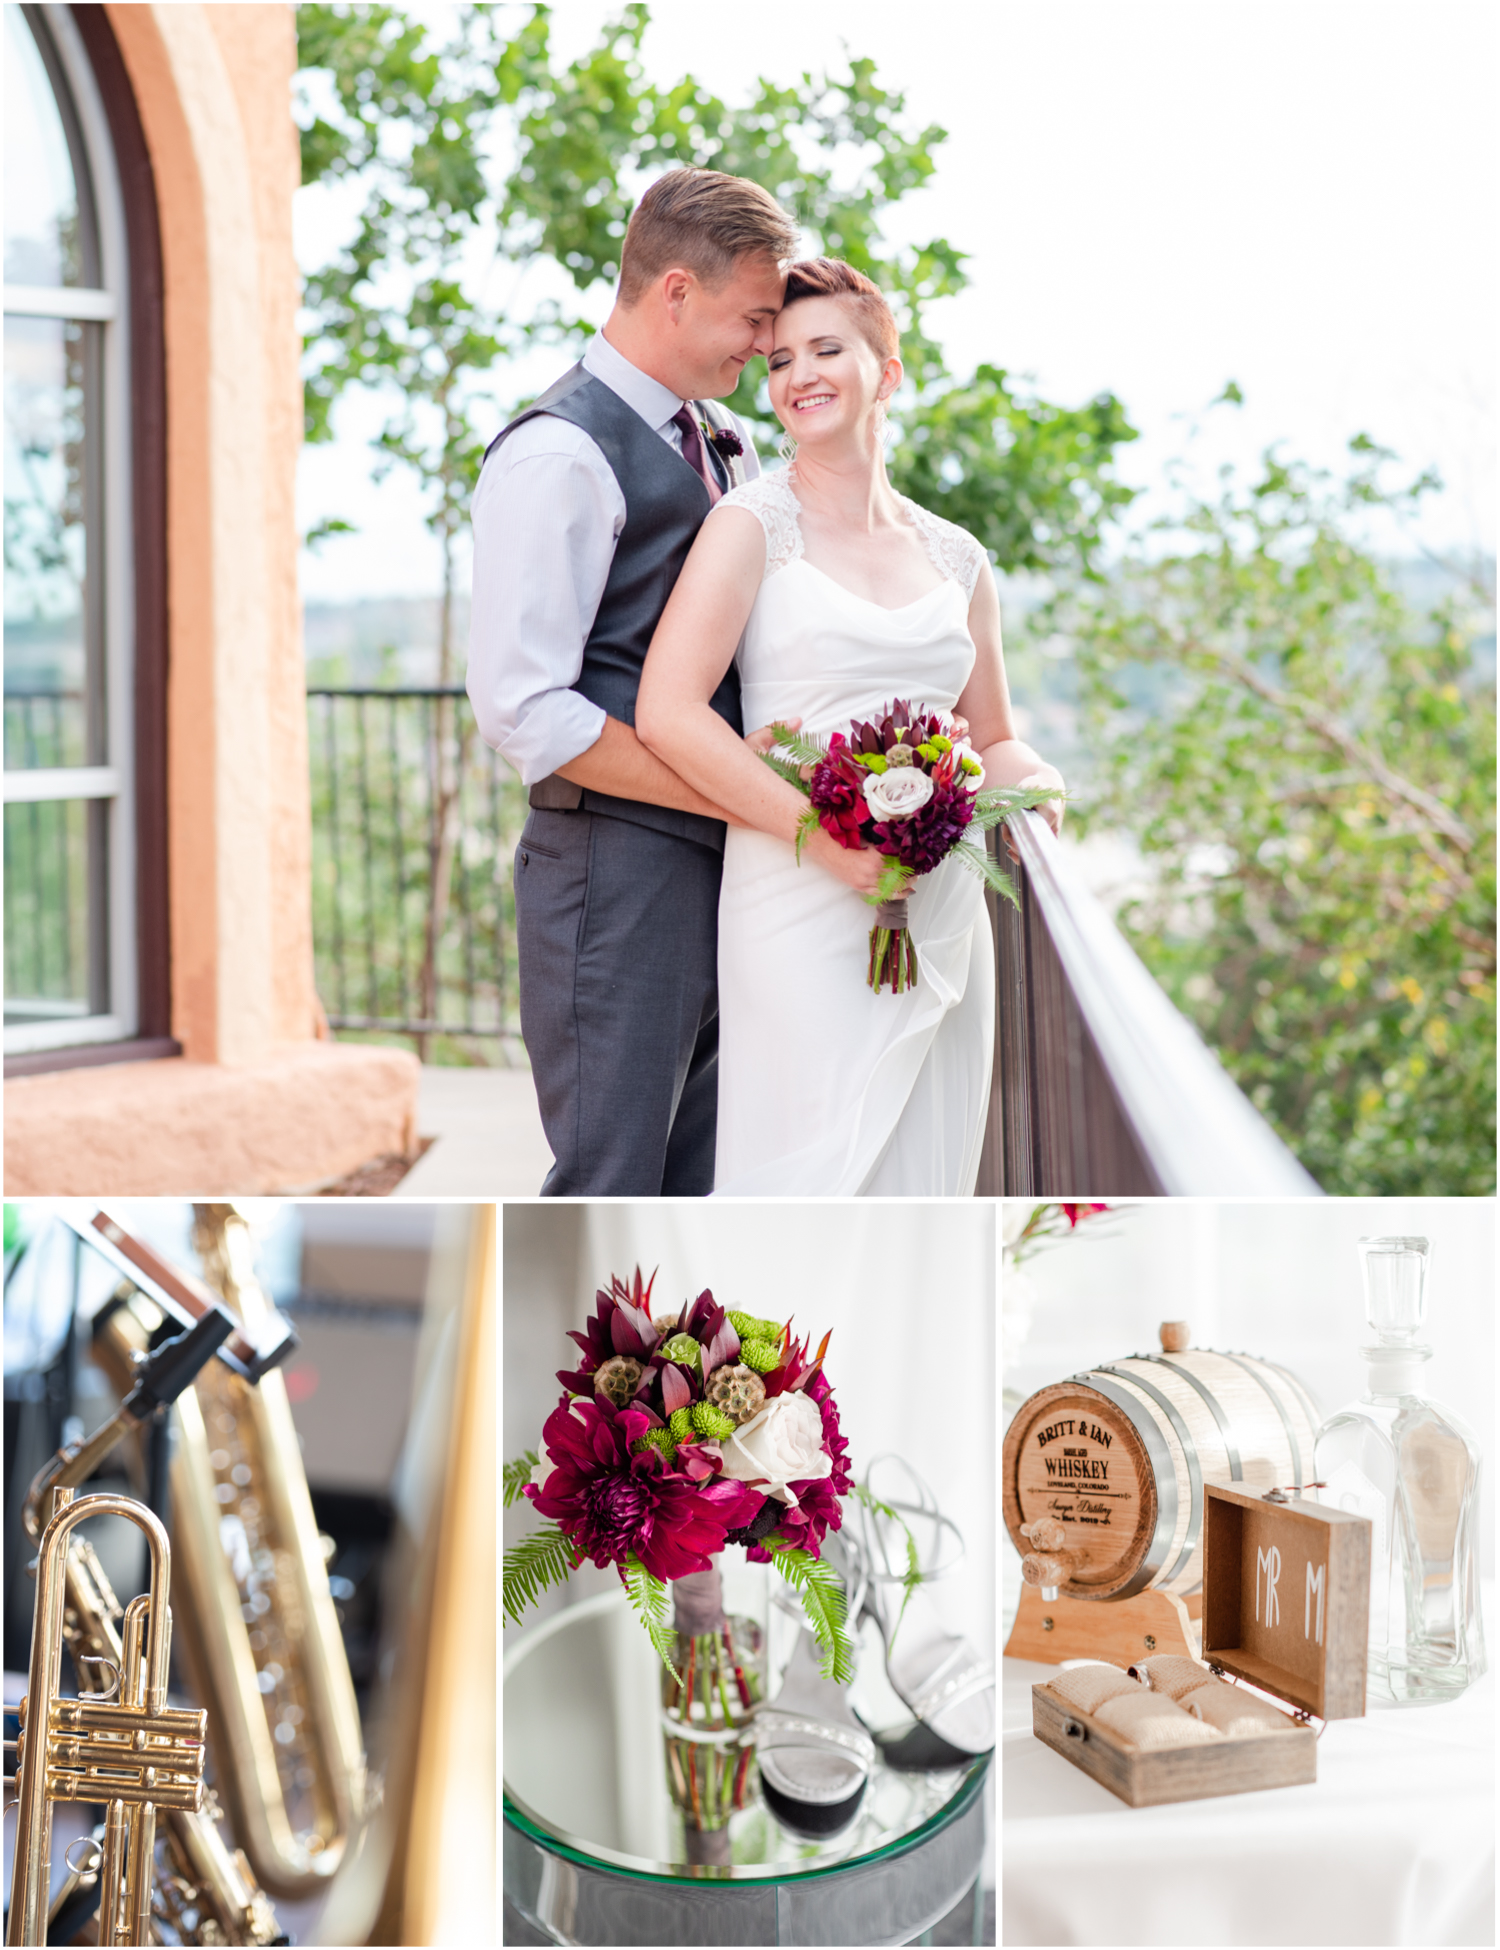 Modern Romantic wedding at Wedgwood Weddings Brittany Hill in Denver Colorado | Britni Girard Photography | Whiskey unity ceremony and live band The Burroughs are highlights of this musician couples wedding | Dragonfly Floral Company